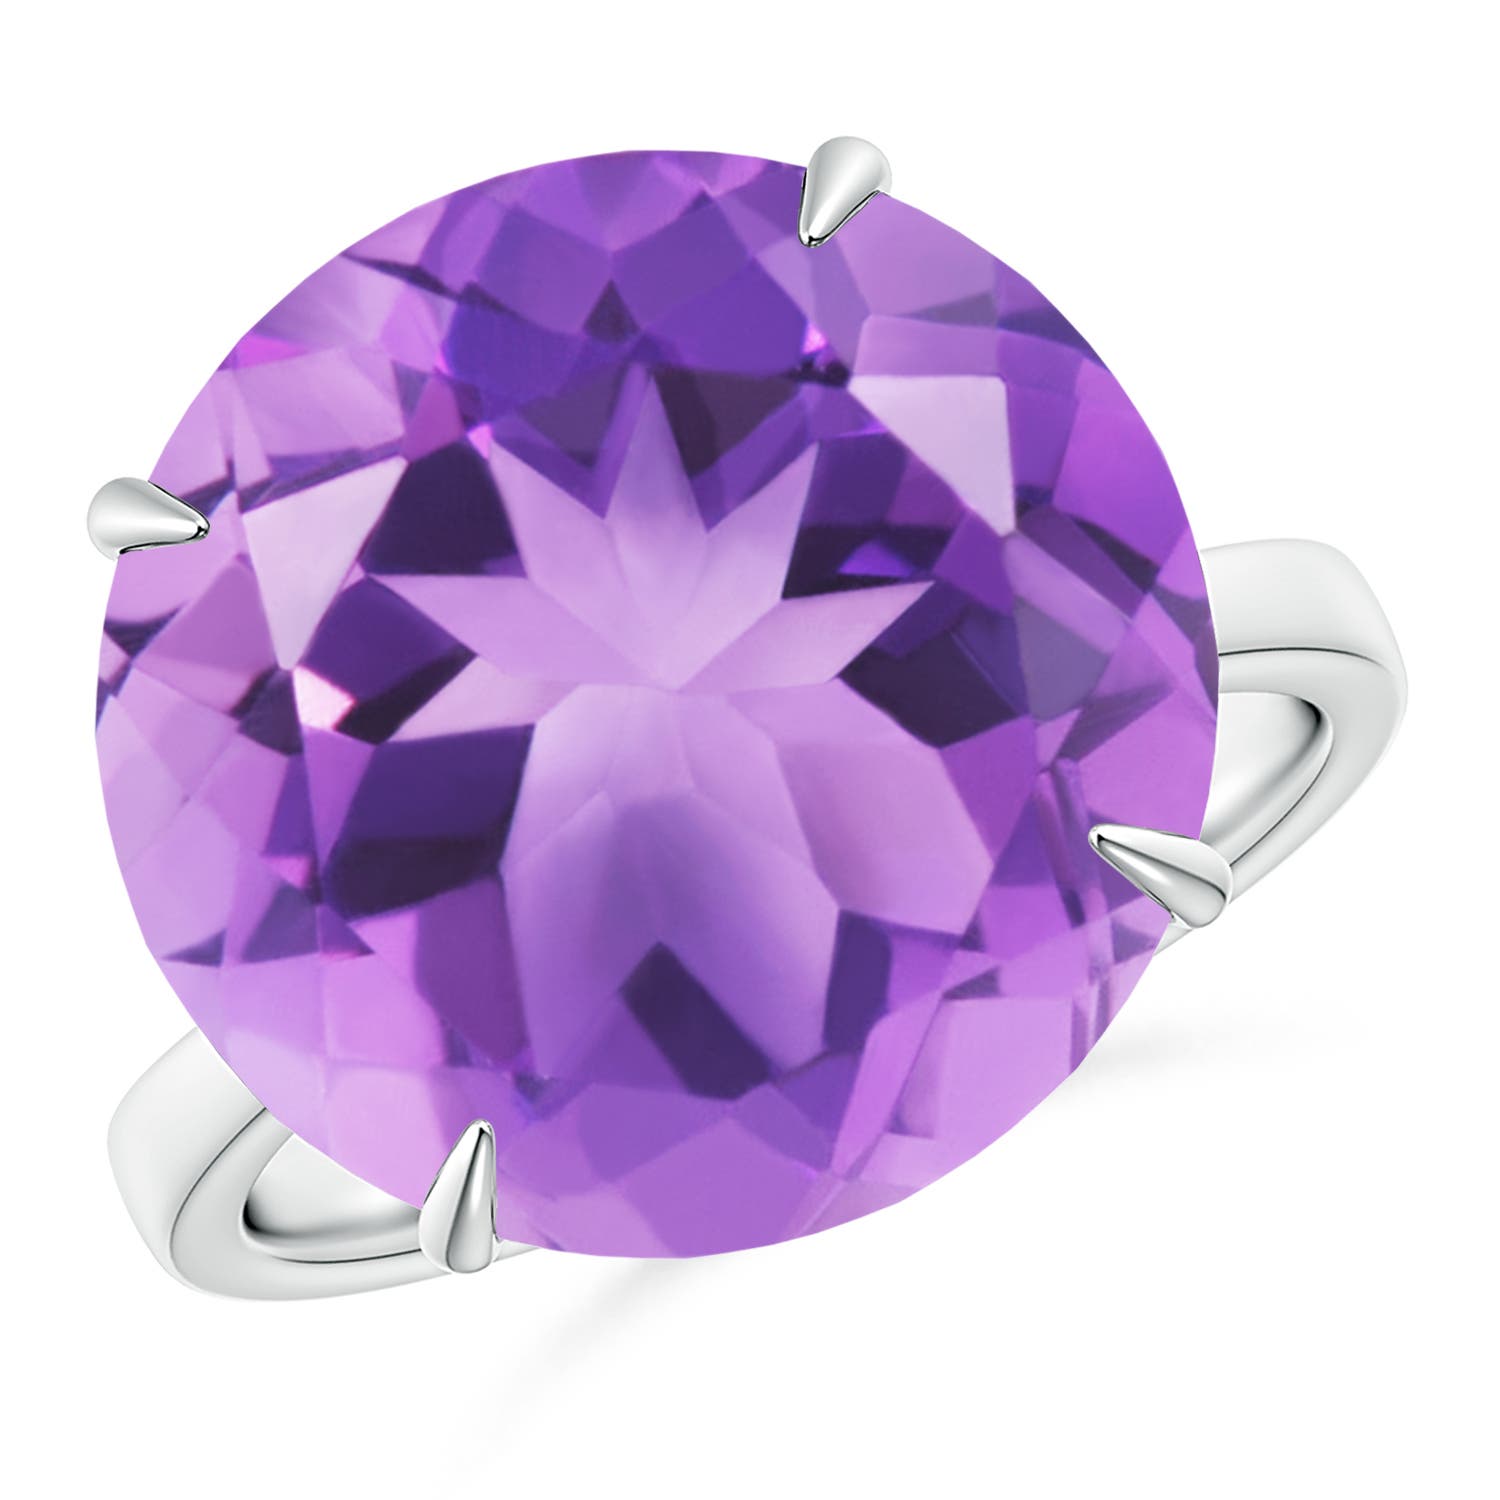 A - Amethyst / 11 CT / 14 KT White Gold